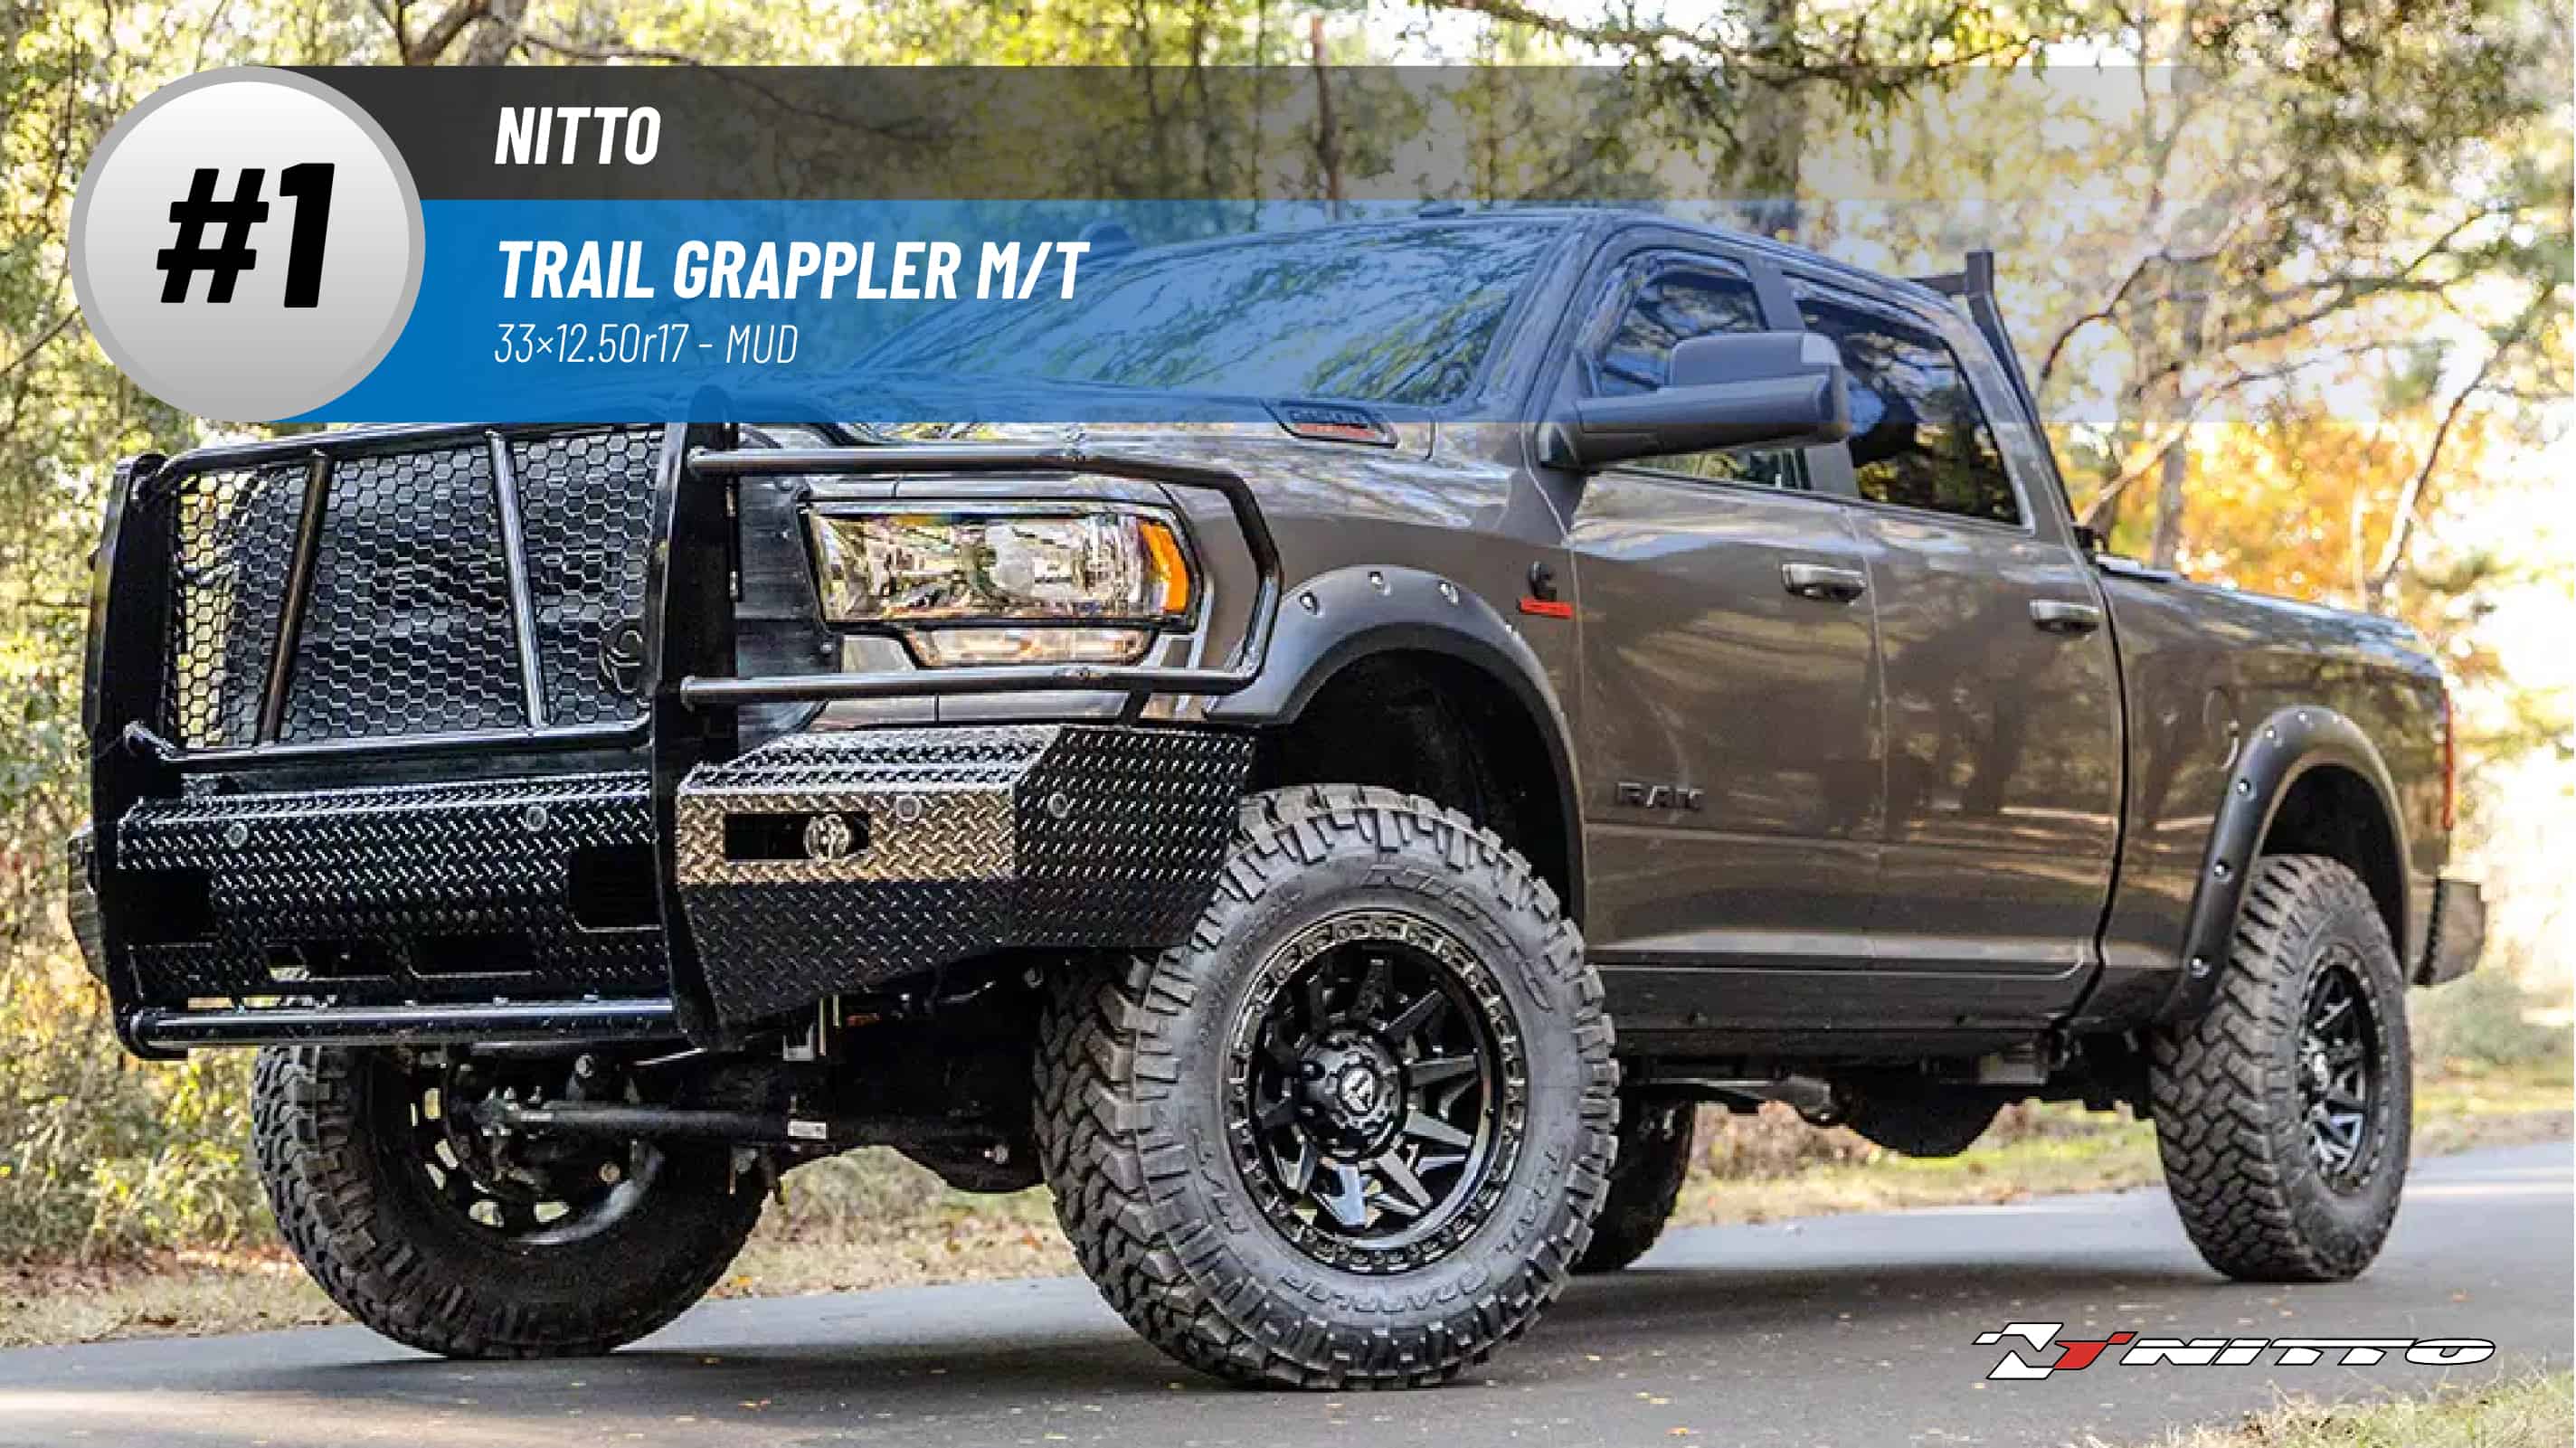 Top #1 Mud Tires: Nitto Trail Grappler M/T – 33x12.50r17